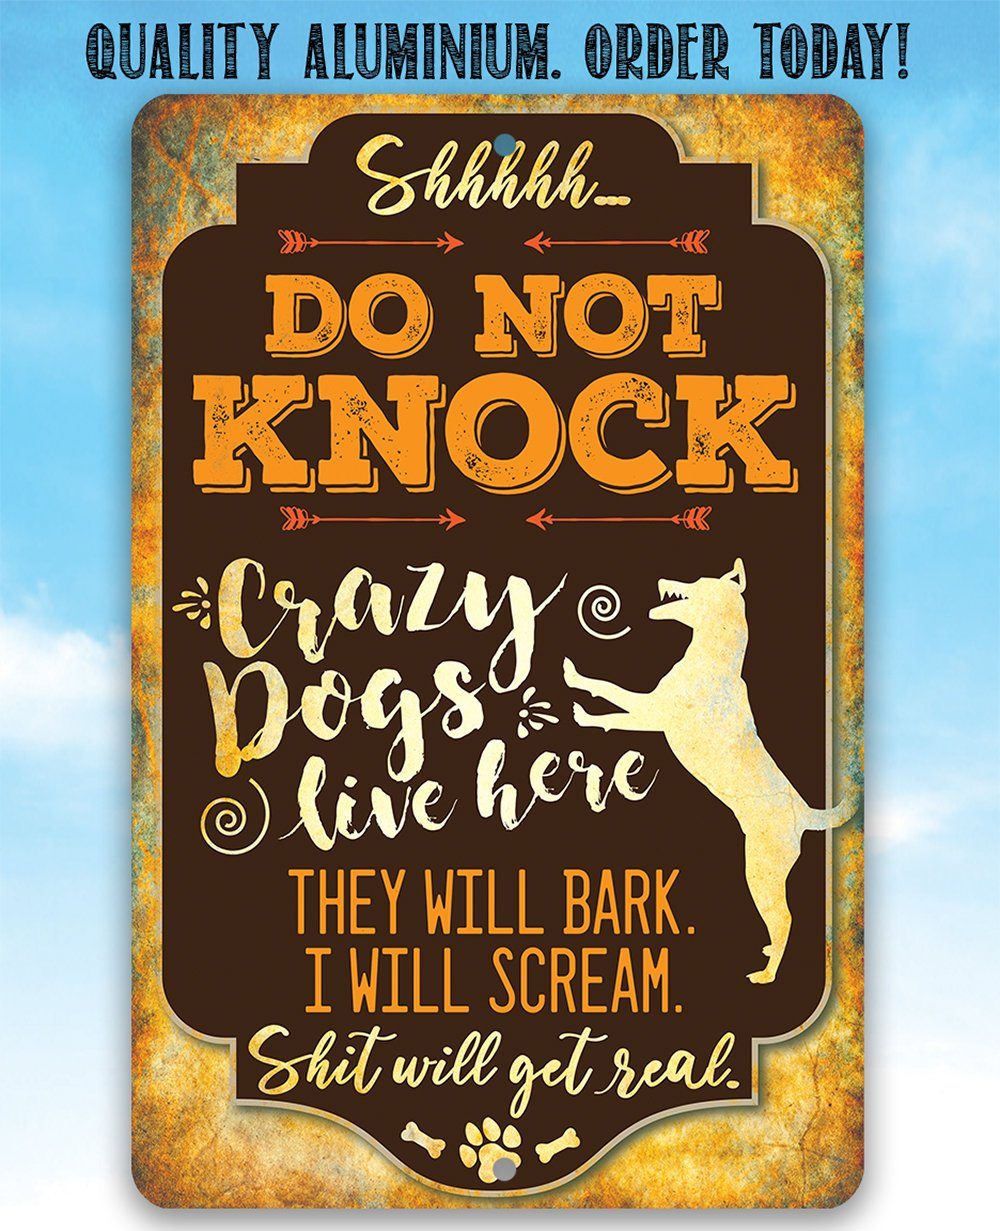 Crazy Dogs Live Here - Metal Sign | Lone Star Art.